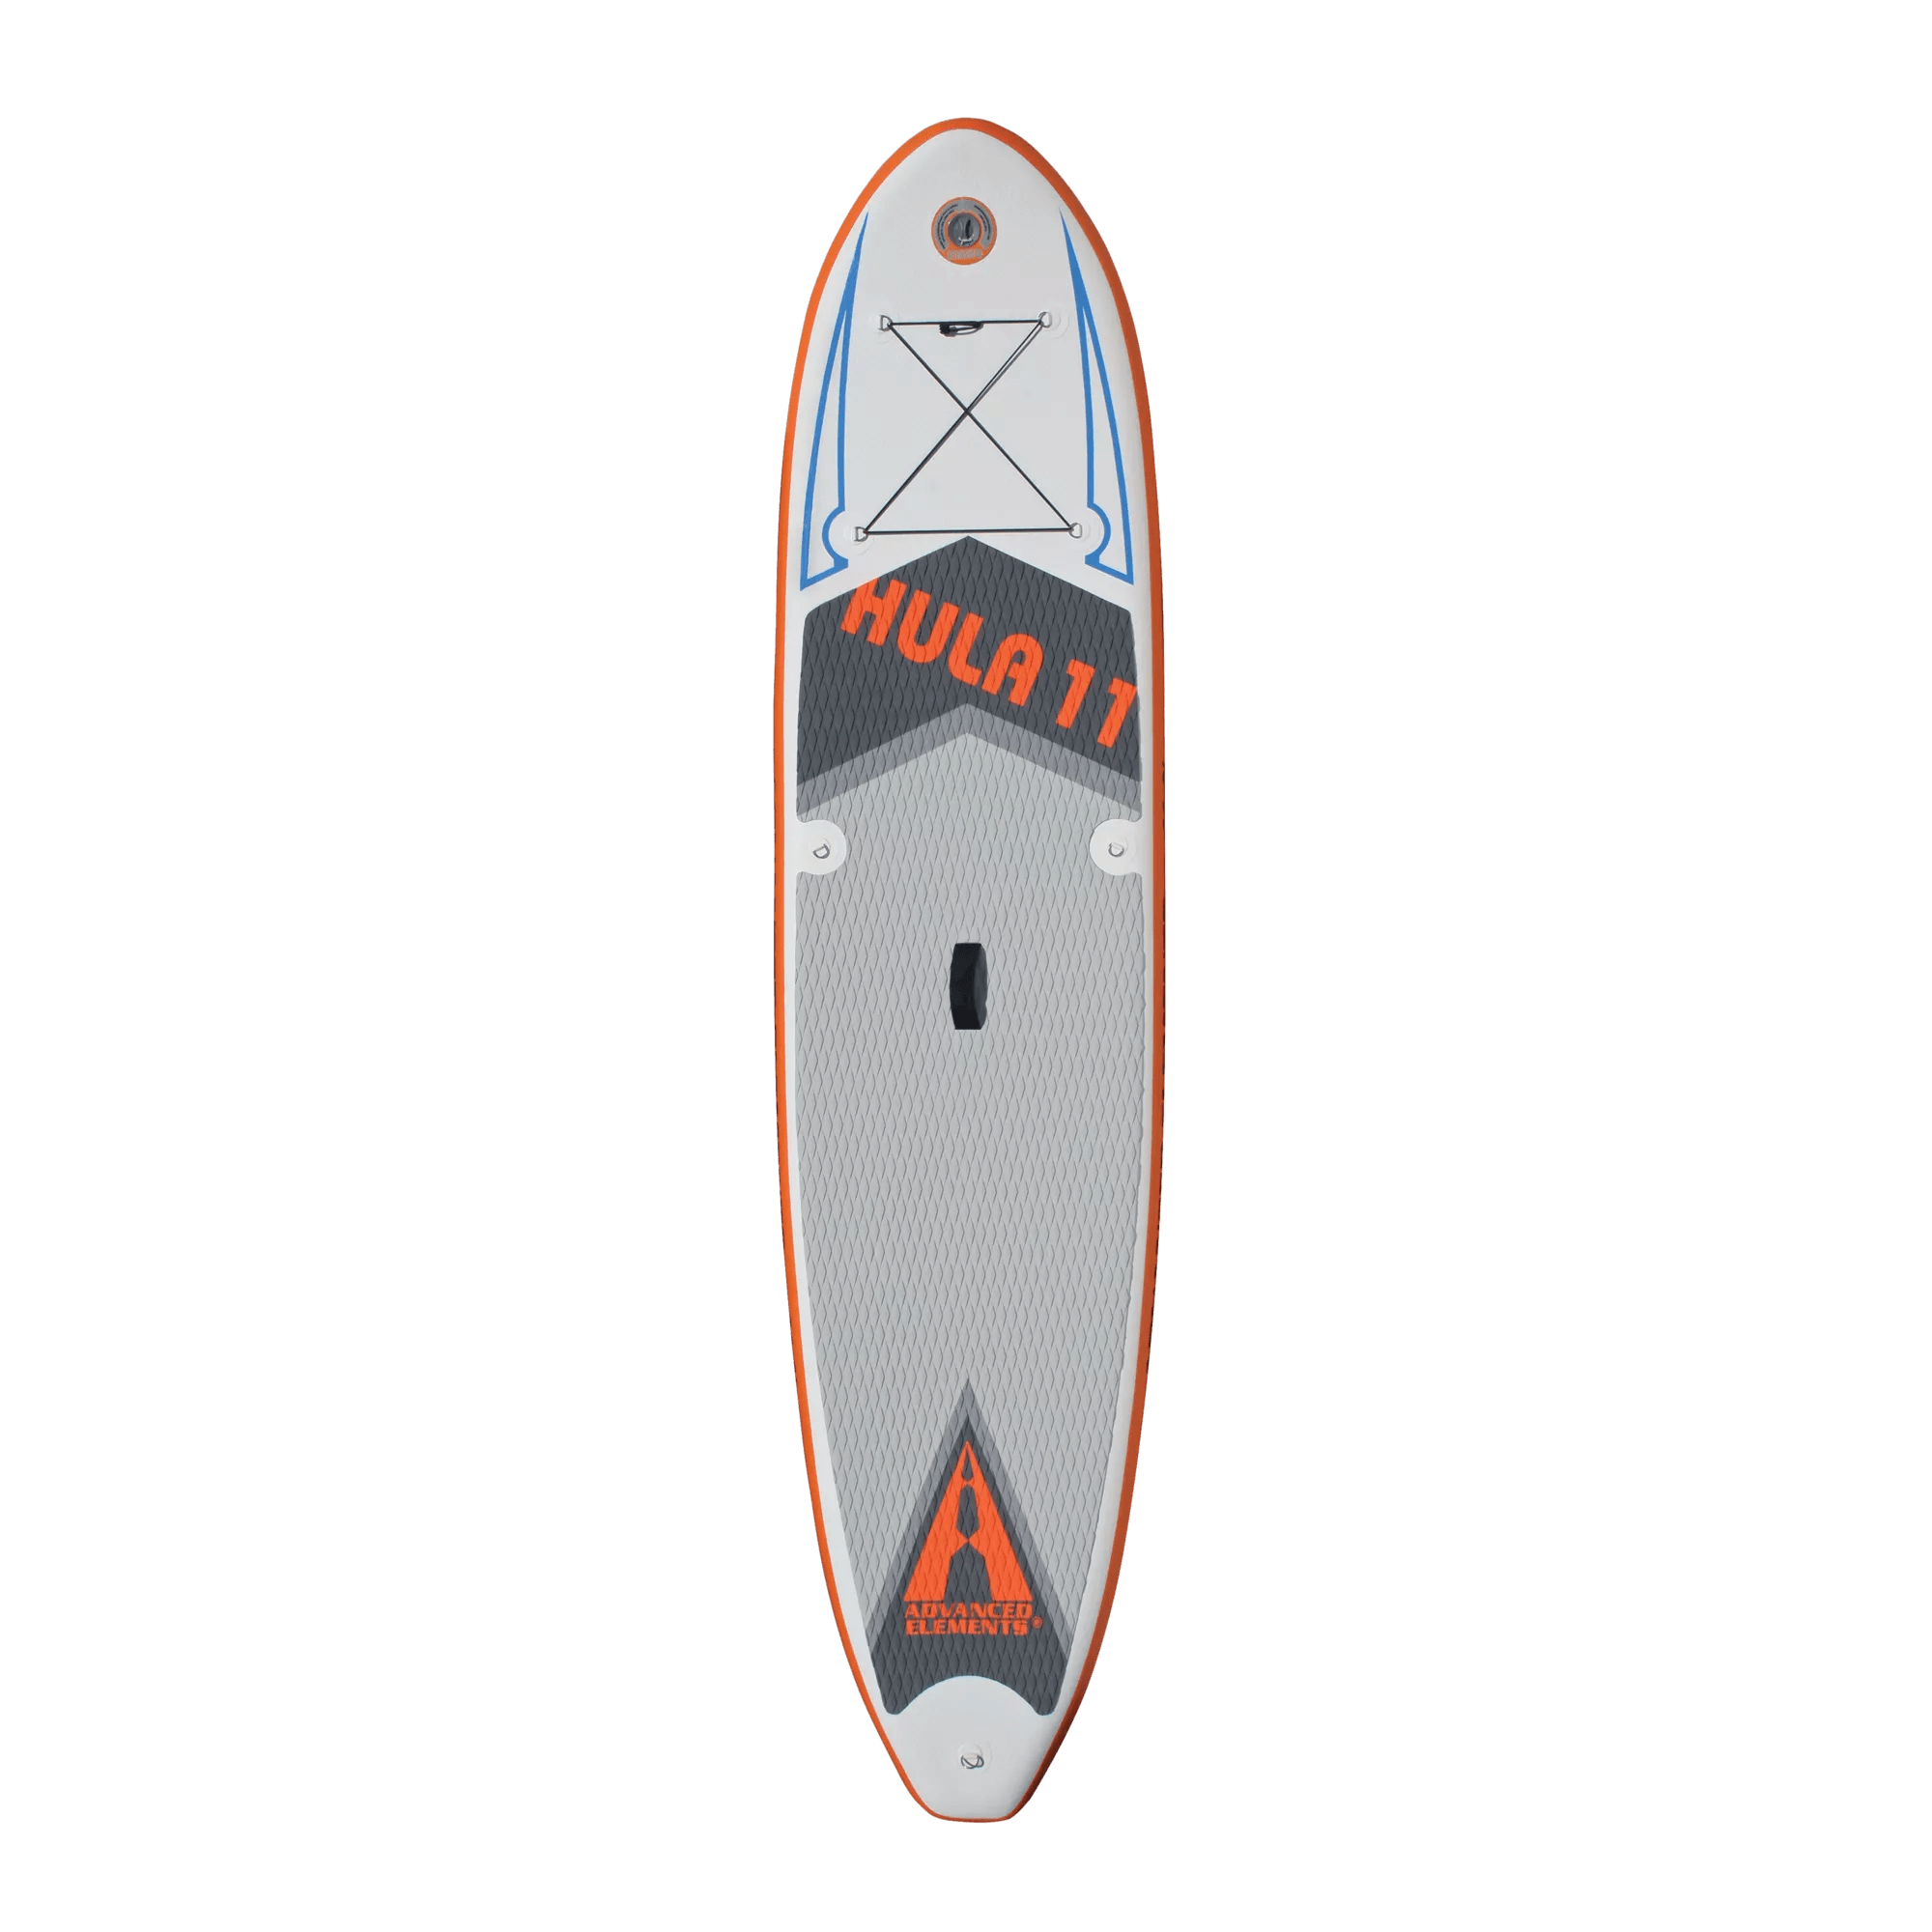 ADVANCED ELEMENTS - Hula 11 Inflatable Stand Up Paddle Board -  - AE1010-O - TOP 